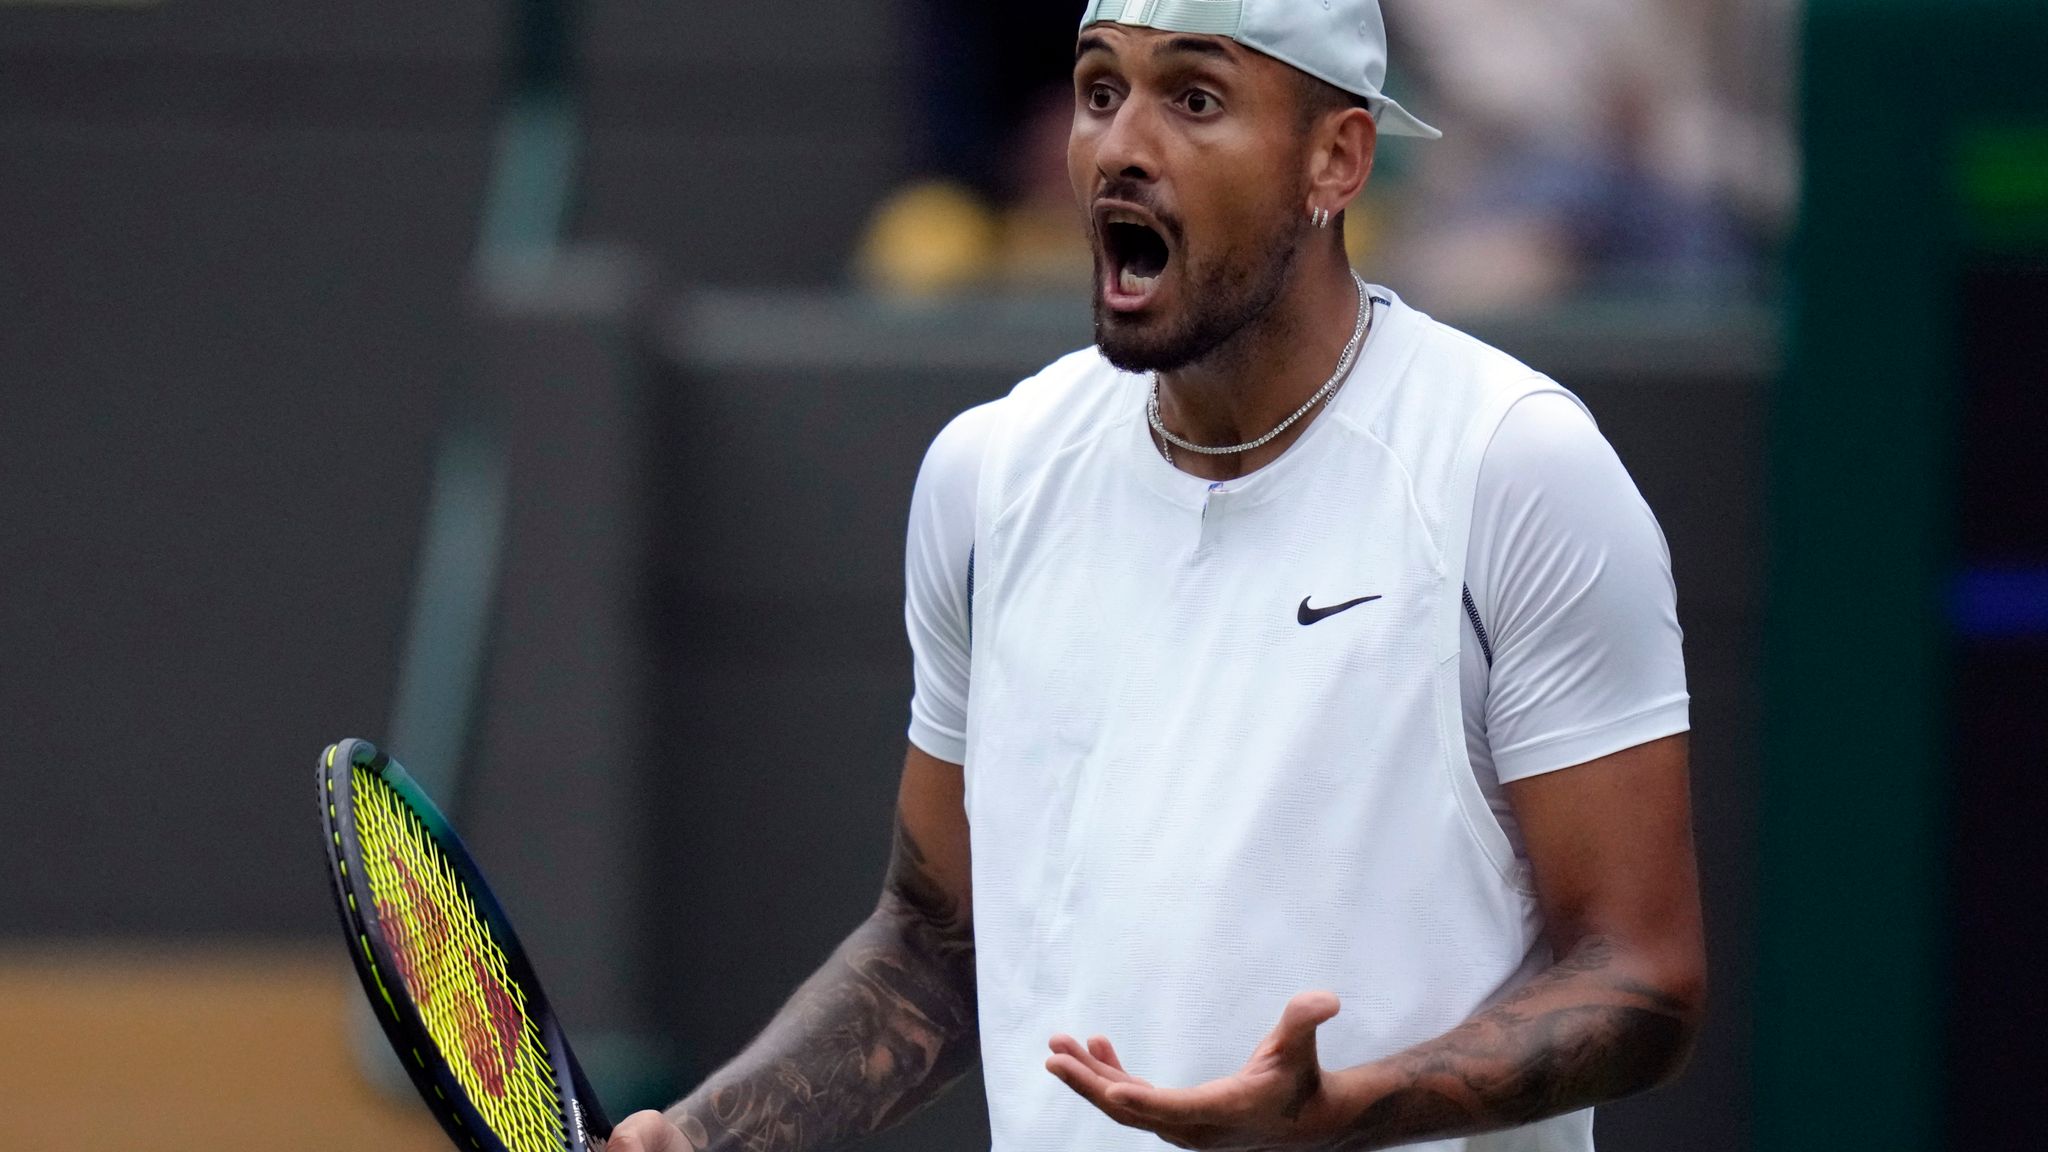 Nick Kyrgios v Stefanos Tsitsipas Ill-tempered Wimbledon match sees swearing, accusations of bullying and balls hit into the crowd UK News Sky News